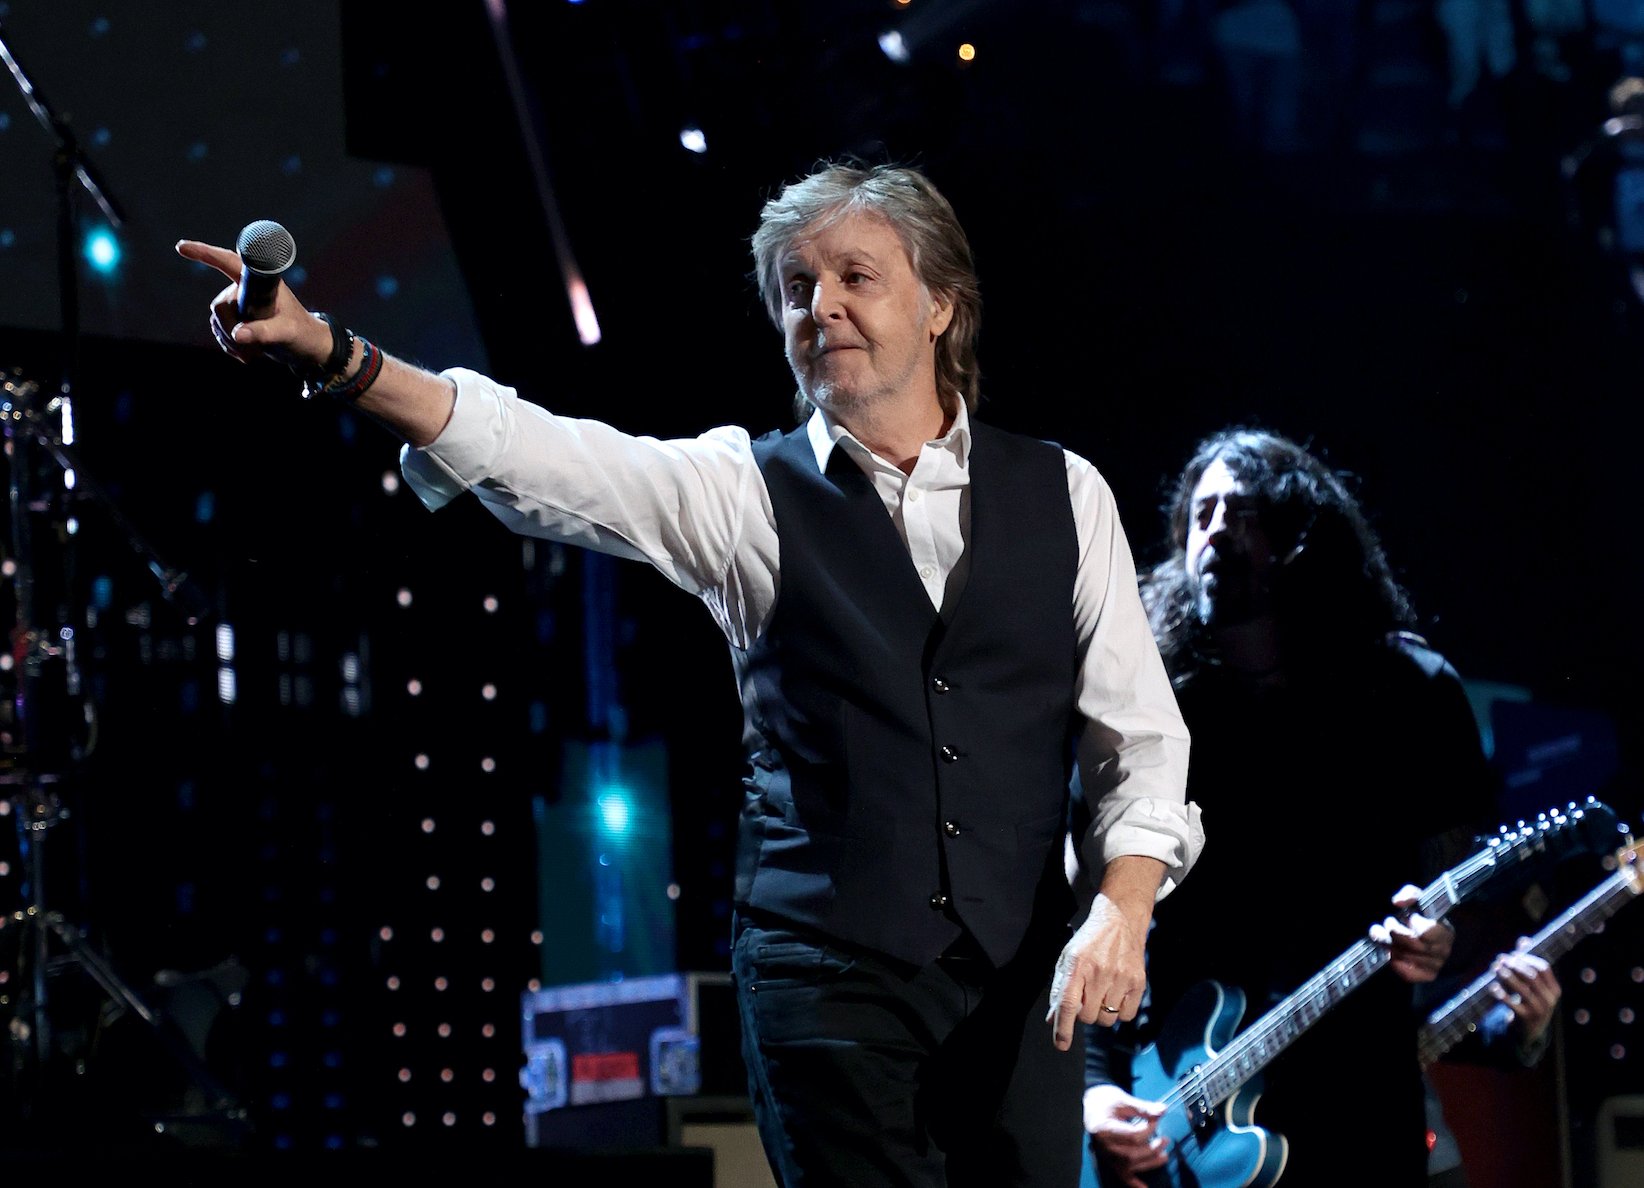 Paul McCartney performs songs at the 36th annual Rock and Roll Hall of Fame induction ceremony